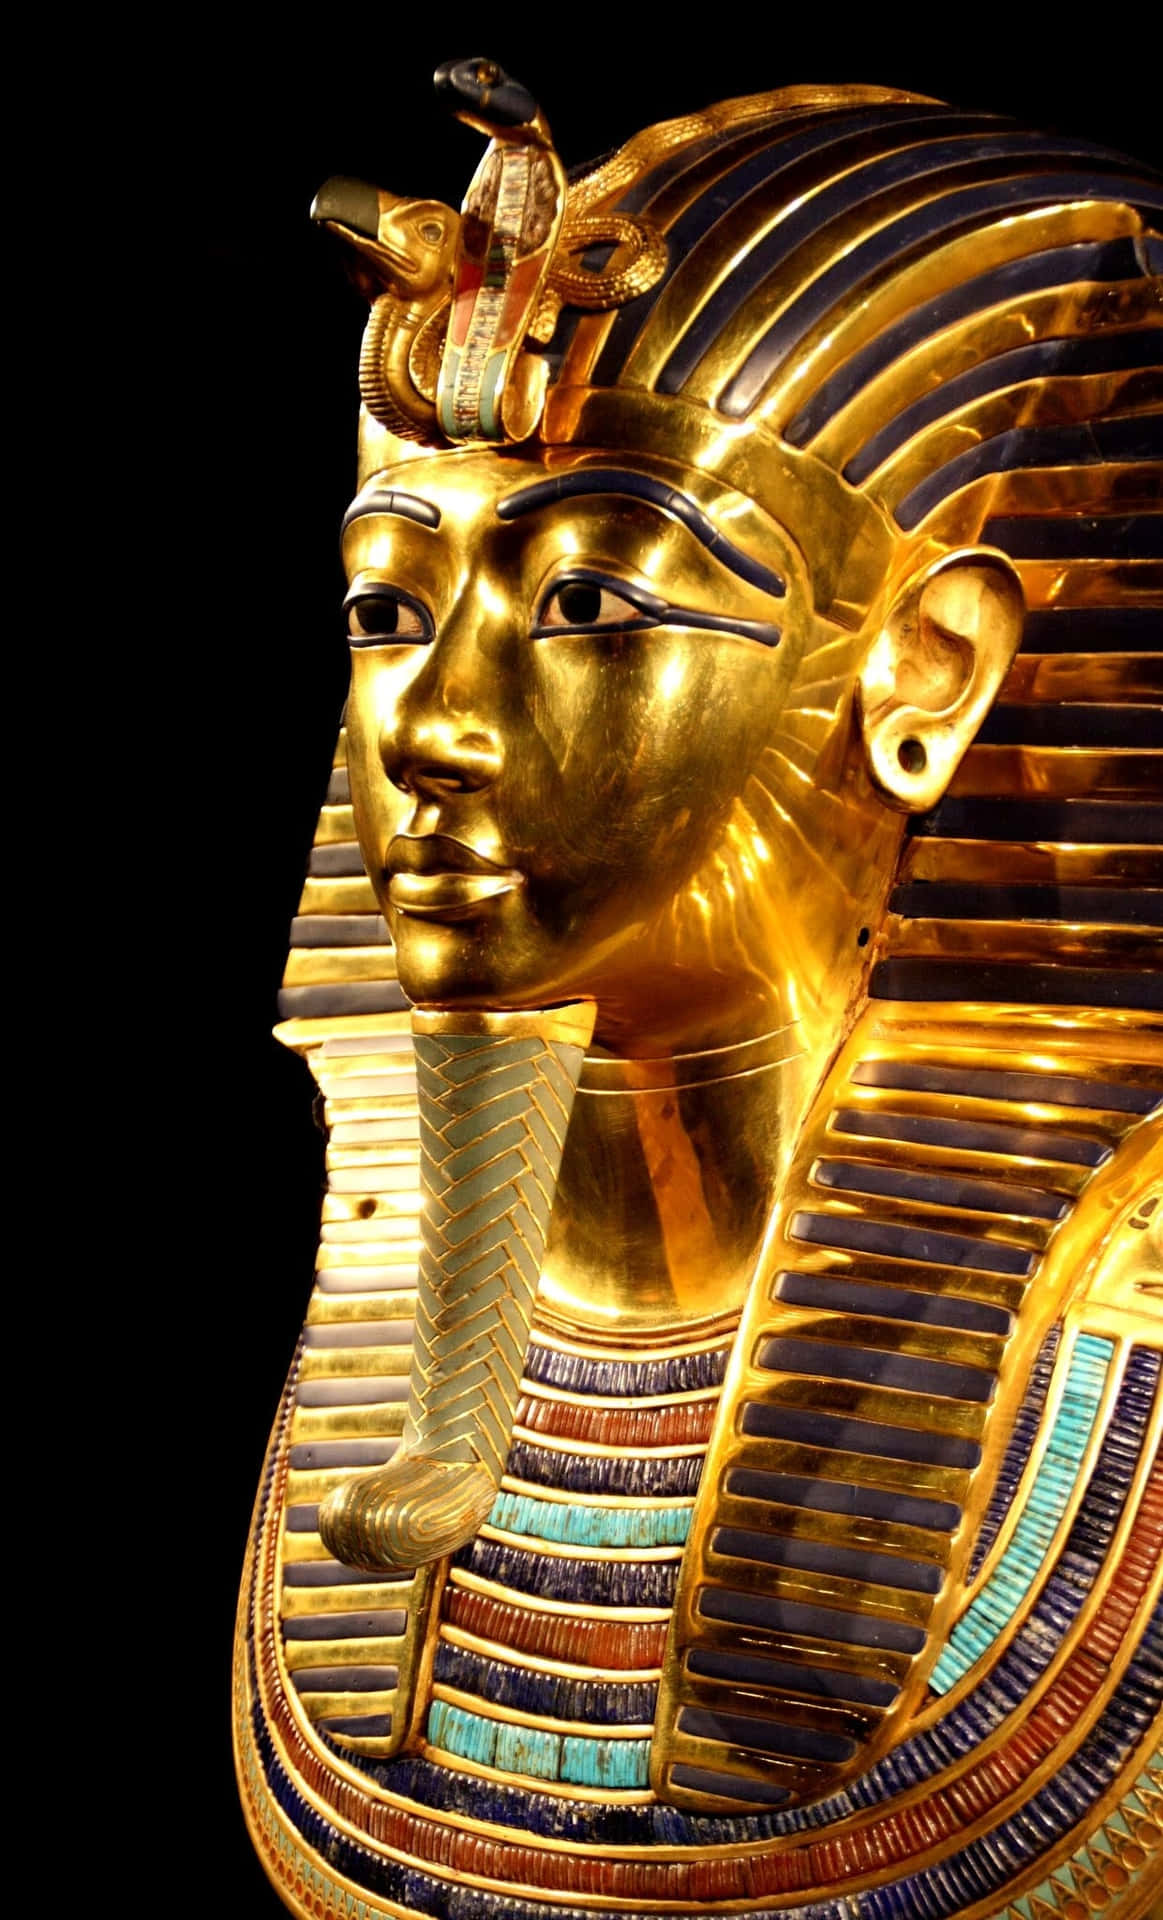 A Golden Egyptian Mask Is Shown On A Black Background